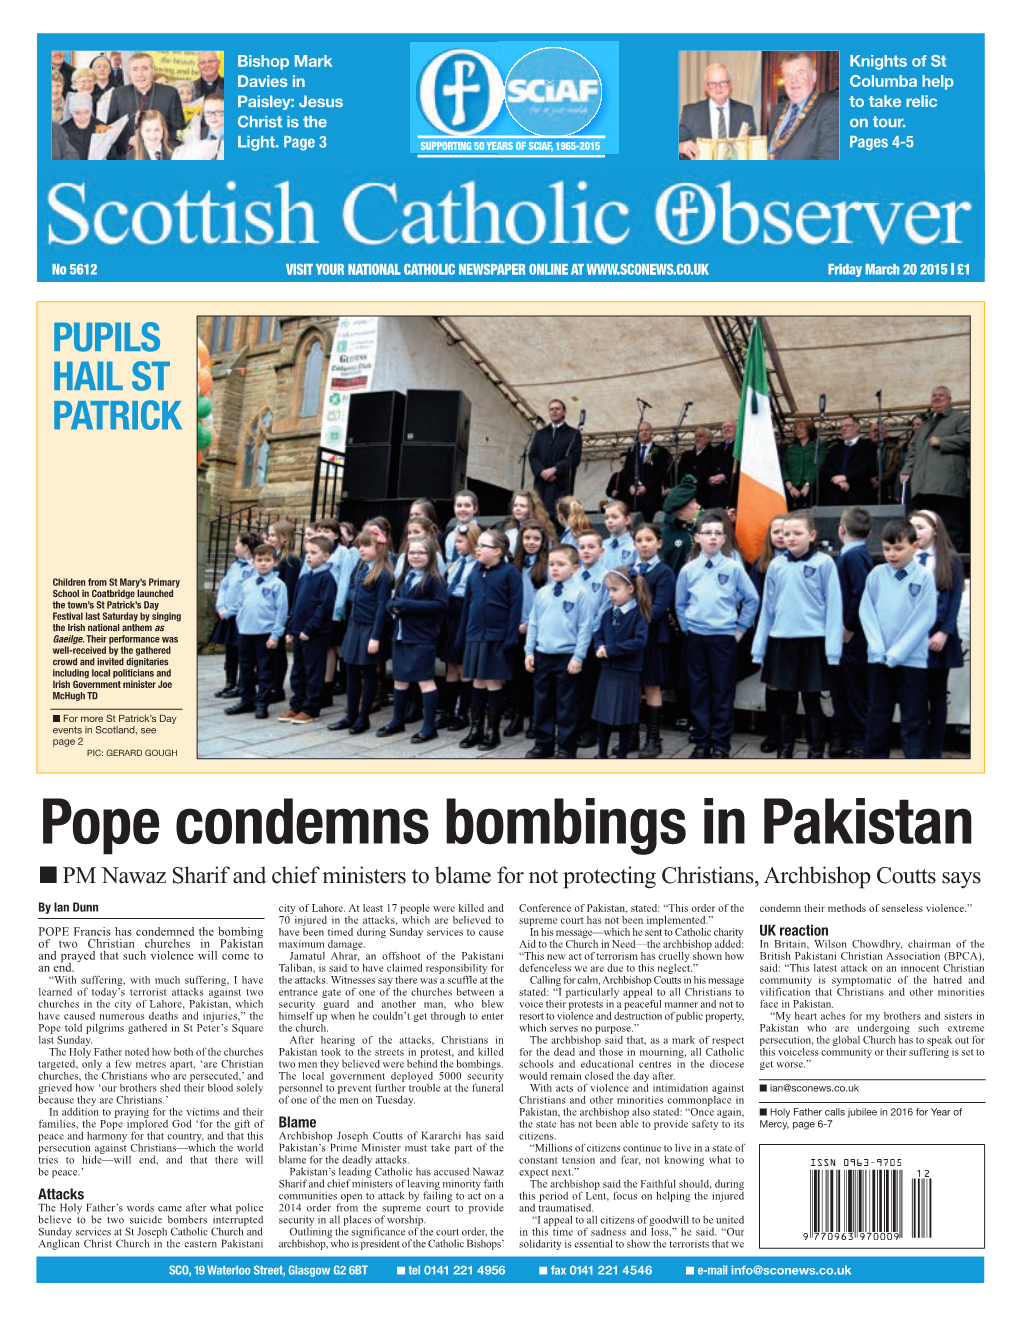 Pope Condemns Bombings in Pakistan I PM Nawaz Sharif and Chief Ministers to Blame for Not Protecting Christians, Archbishop Coutts Says by Ian Dunn City of Lahore